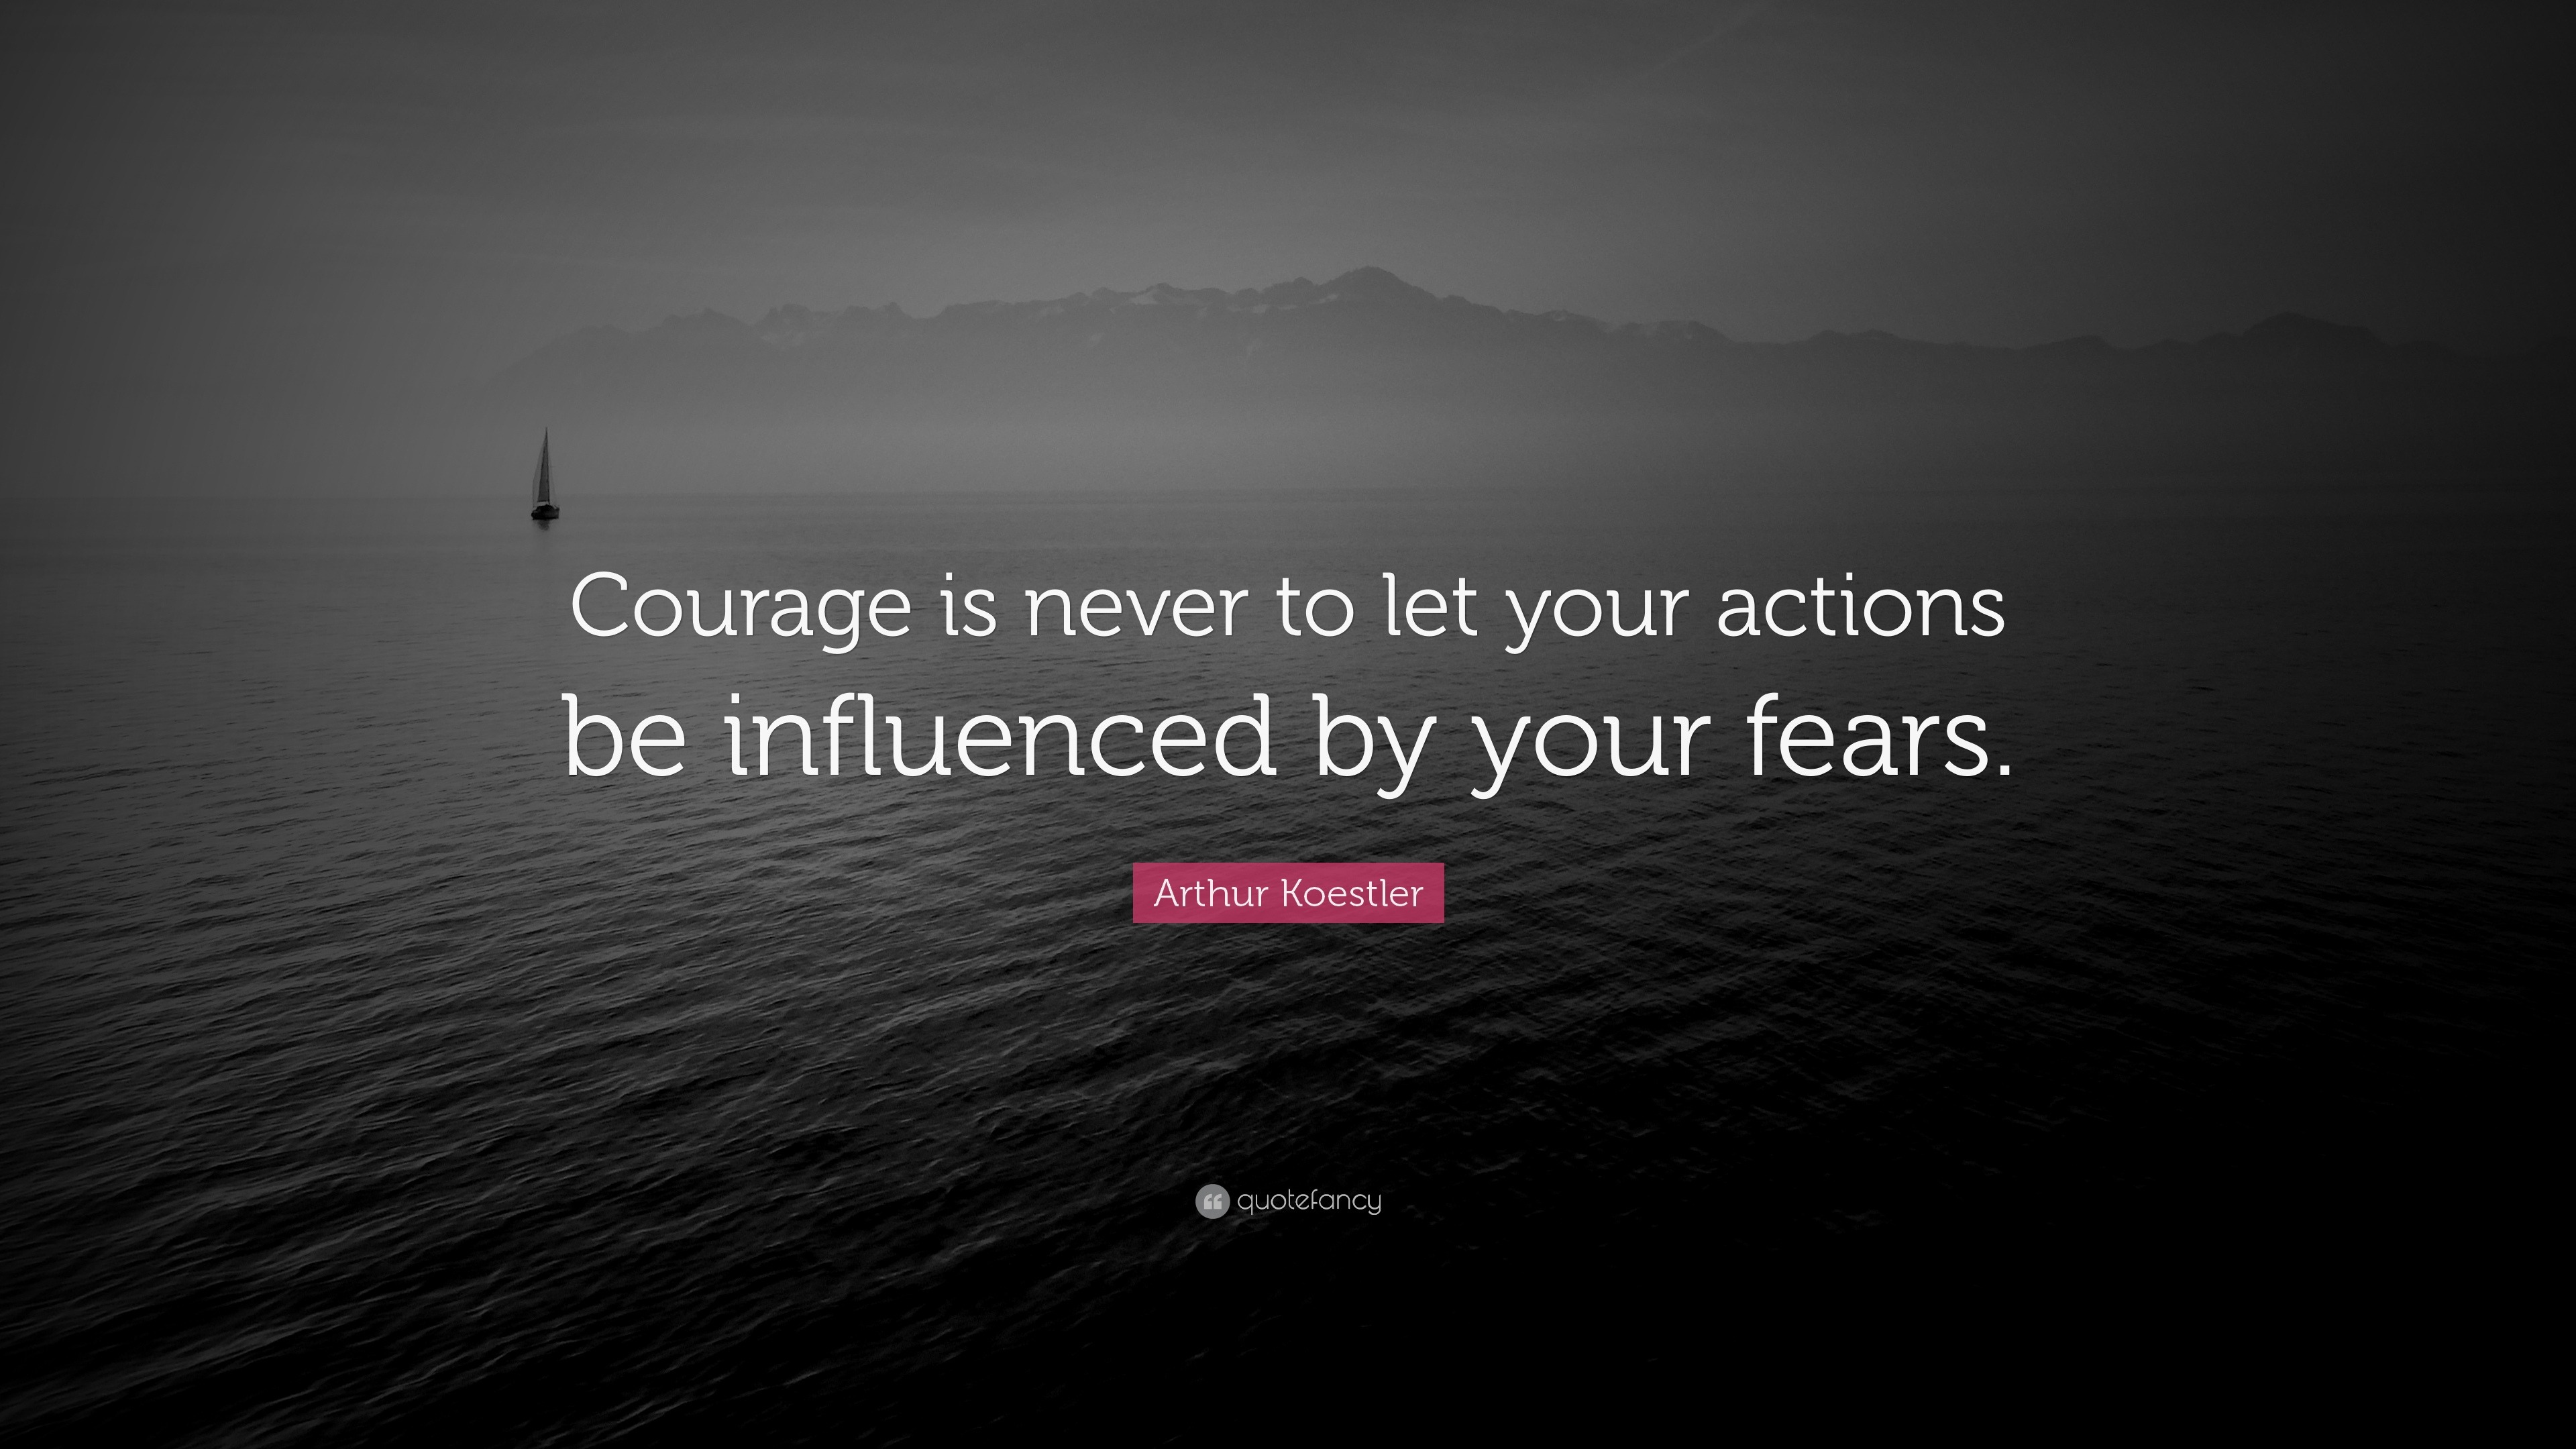 Arthur Koestler Quote: “Courage is never to let your actions be ...